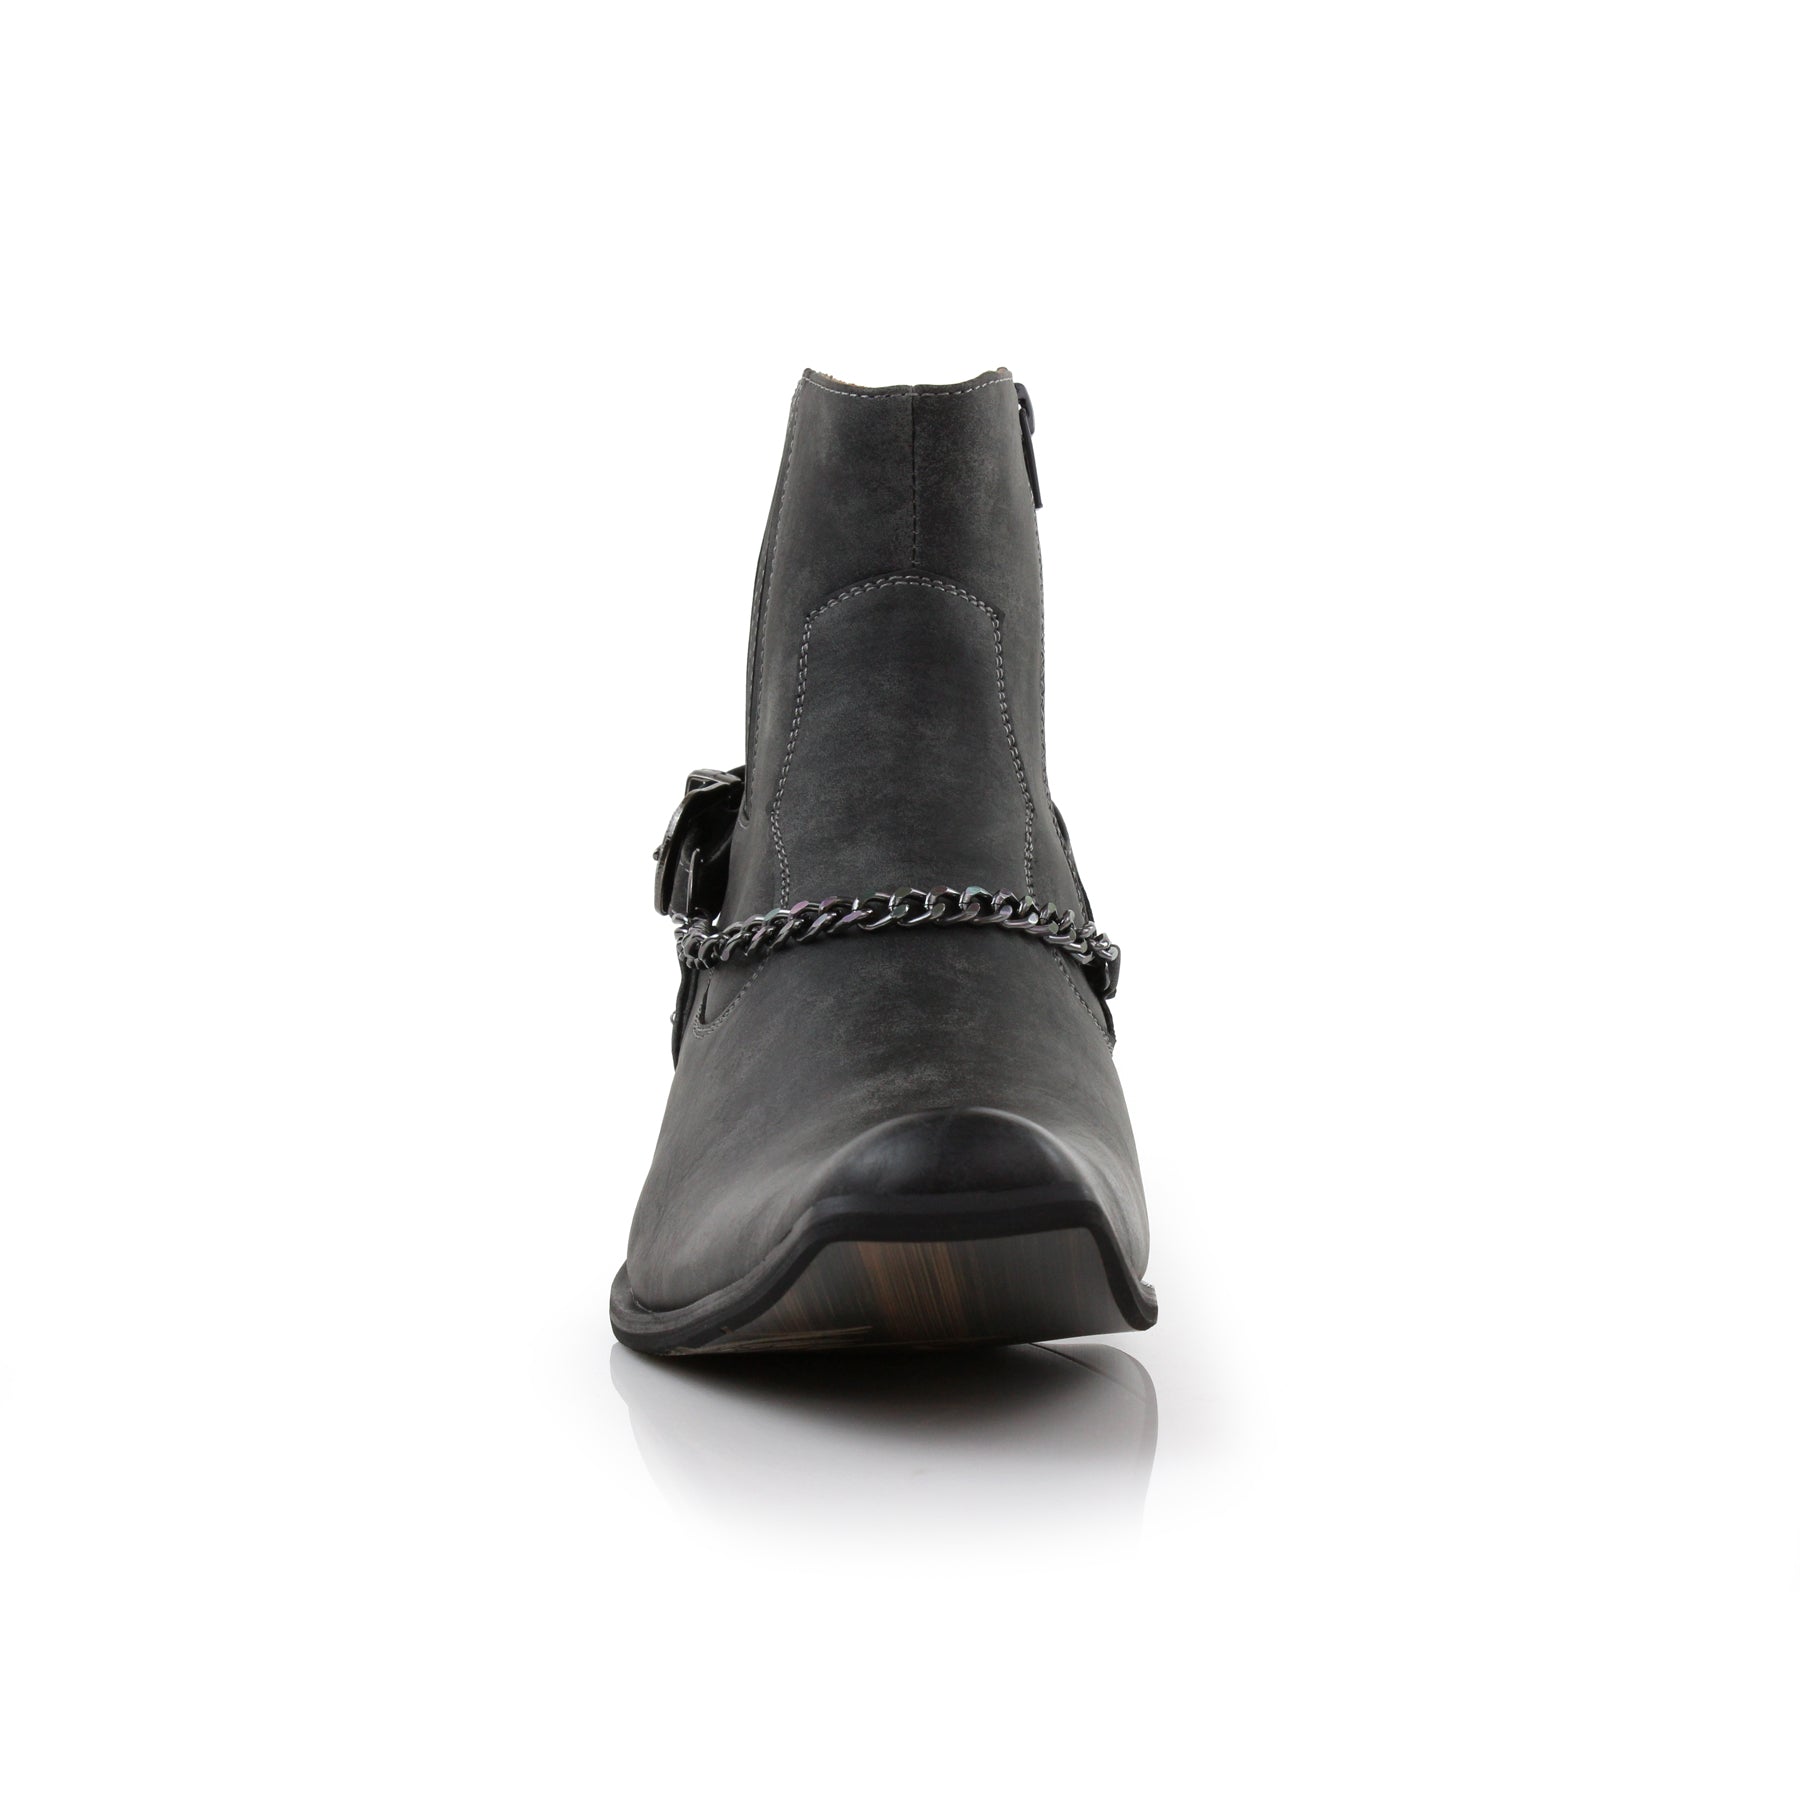 Faux Leather Cowboy Boots | Reyes by Ferro Aldo | Conal Footwear | Front Angle View